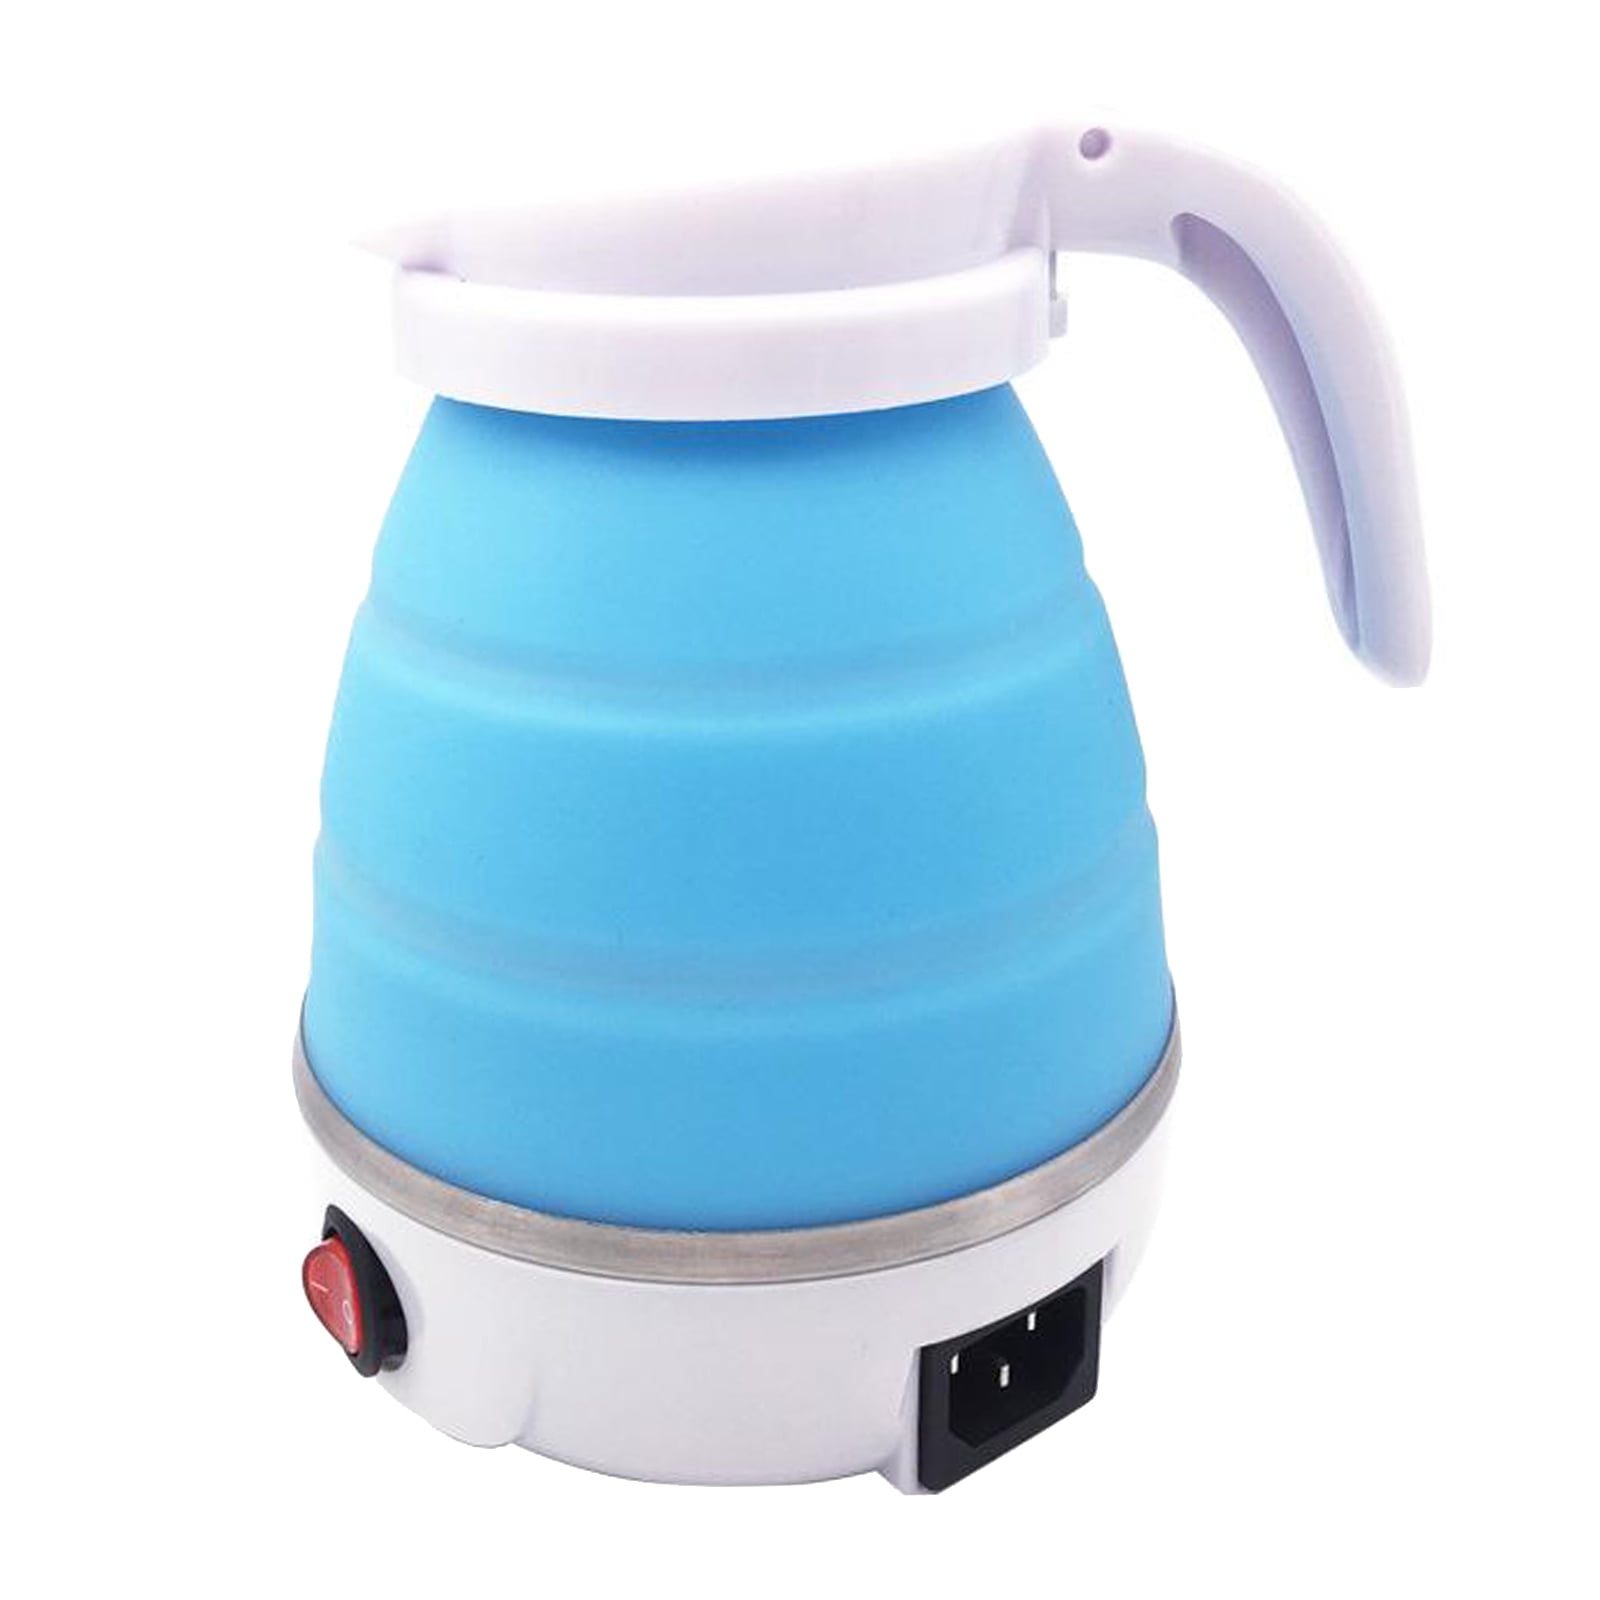 Ultrathin Upgraded Food Grade Silicone Travel Foldable Electric Kettle Boil  Dry Protection Portable with Dual Voltage and Separable Power Cord,555ML  110-220V US Plug EU Plug UK Plug